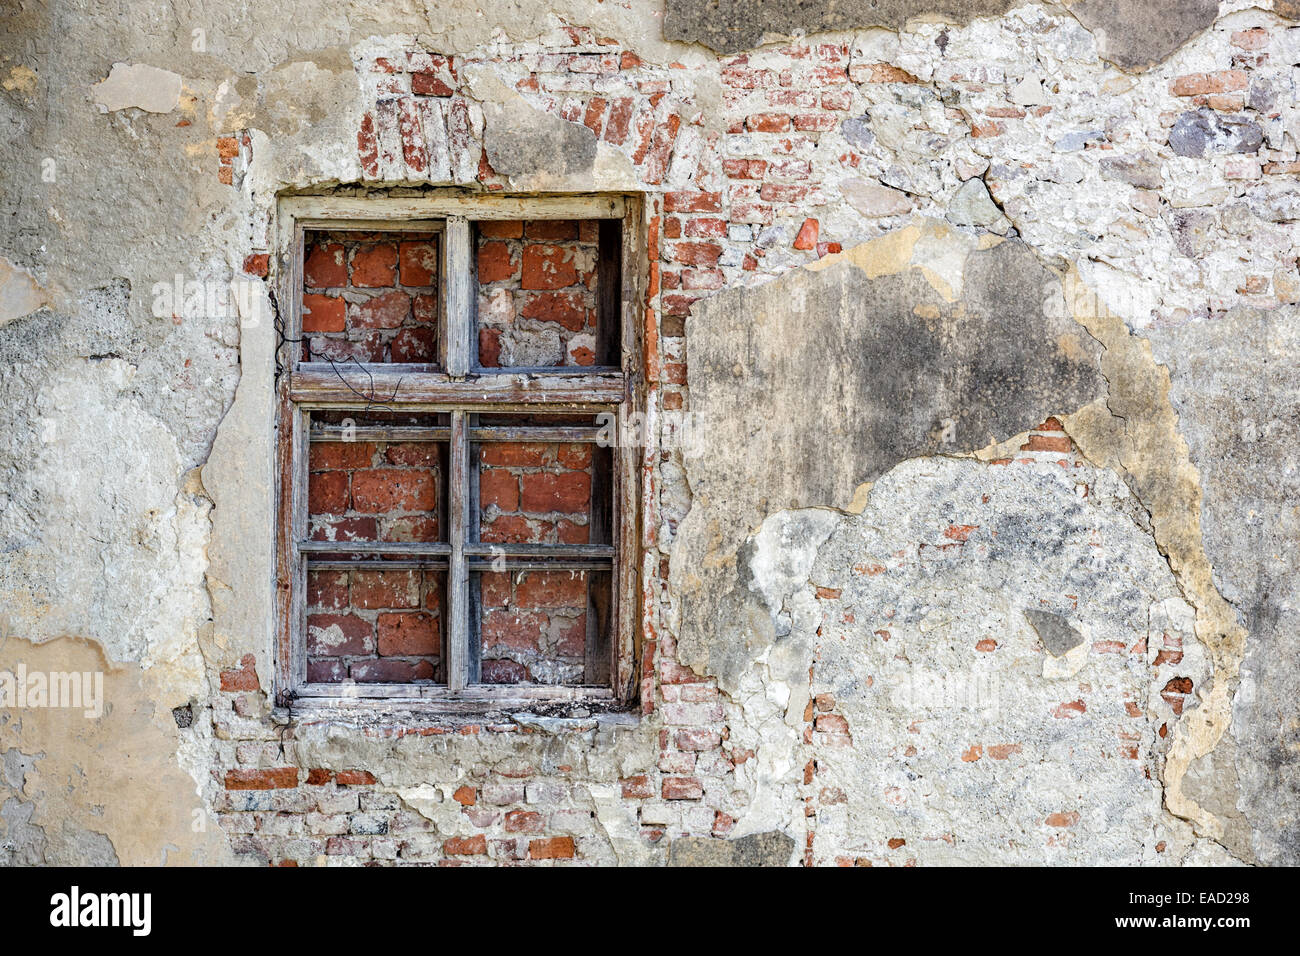 closed-blocked-window-and-old-stone-wall-background-EAD298.jpg